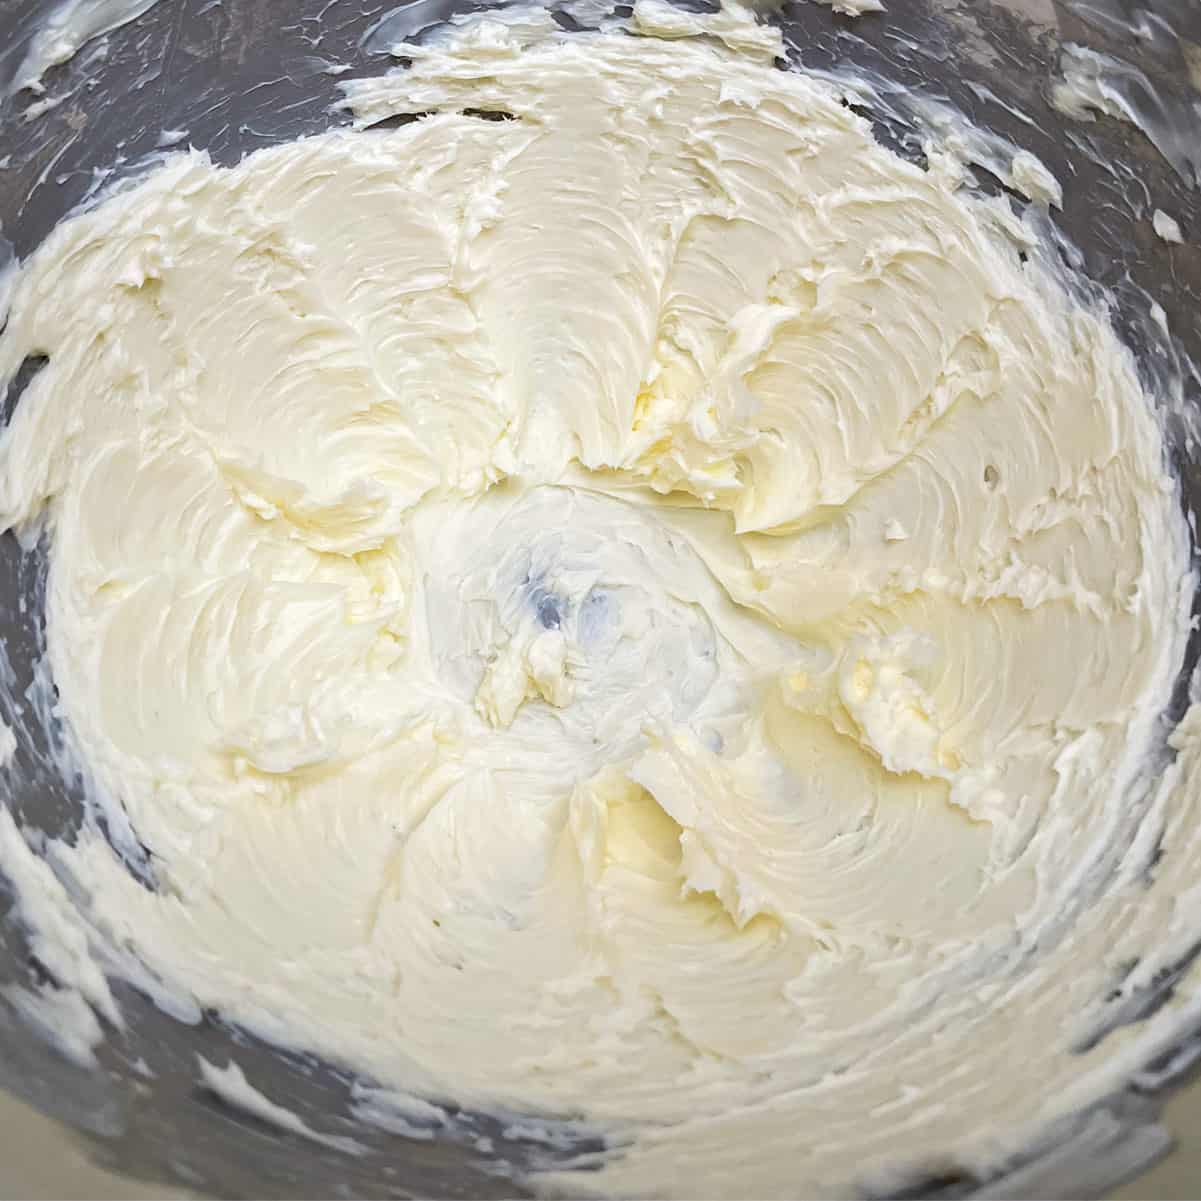 Starting with just butter in the mixer. Smooth and creamy so you know it mix well with the sugar.